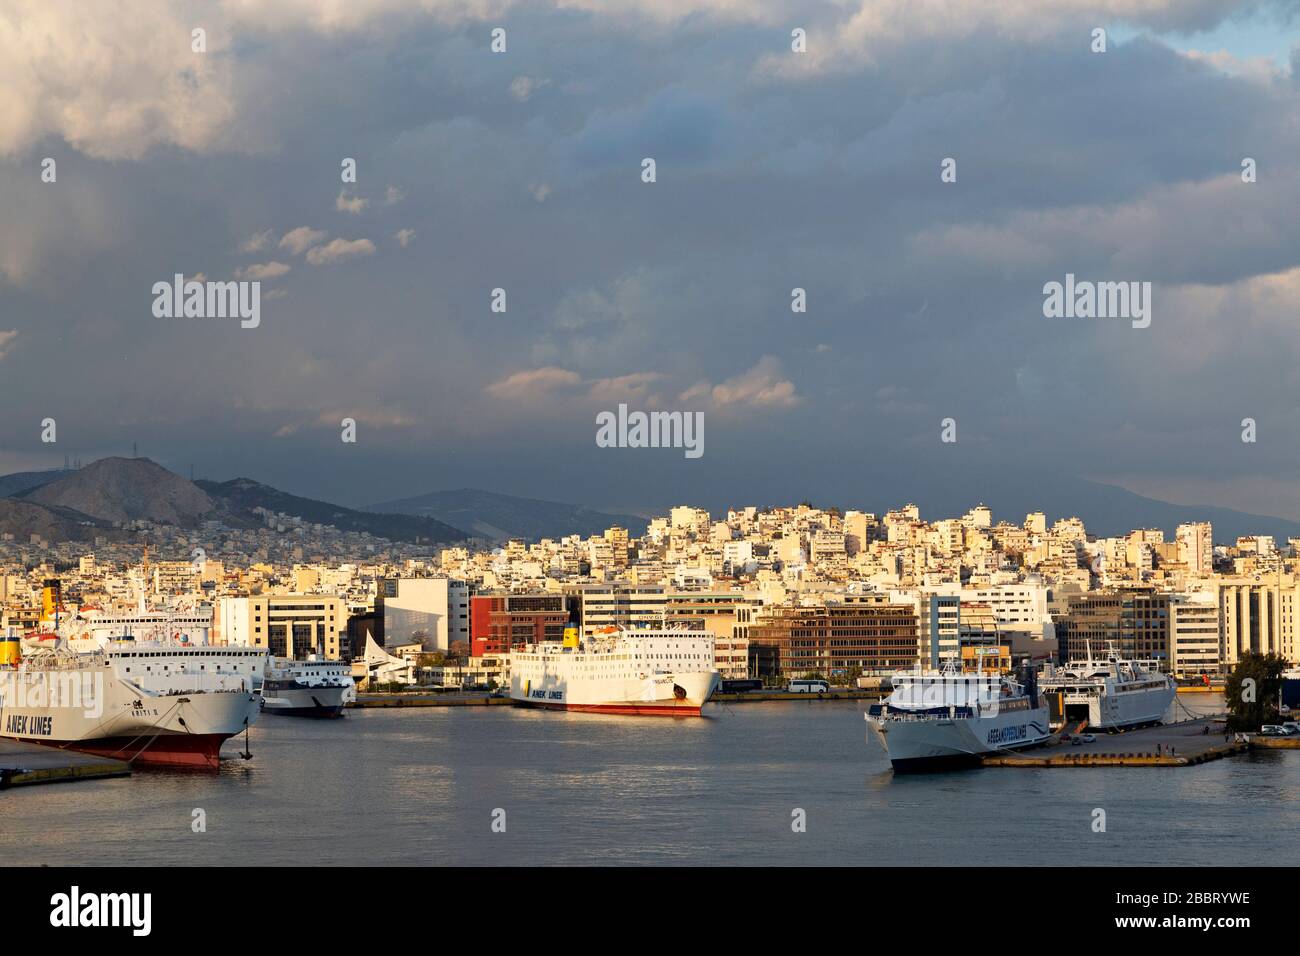 Ferries in the Port of Piraeus in Greece. The ships operate on the Aegean Sea. Stock Photo